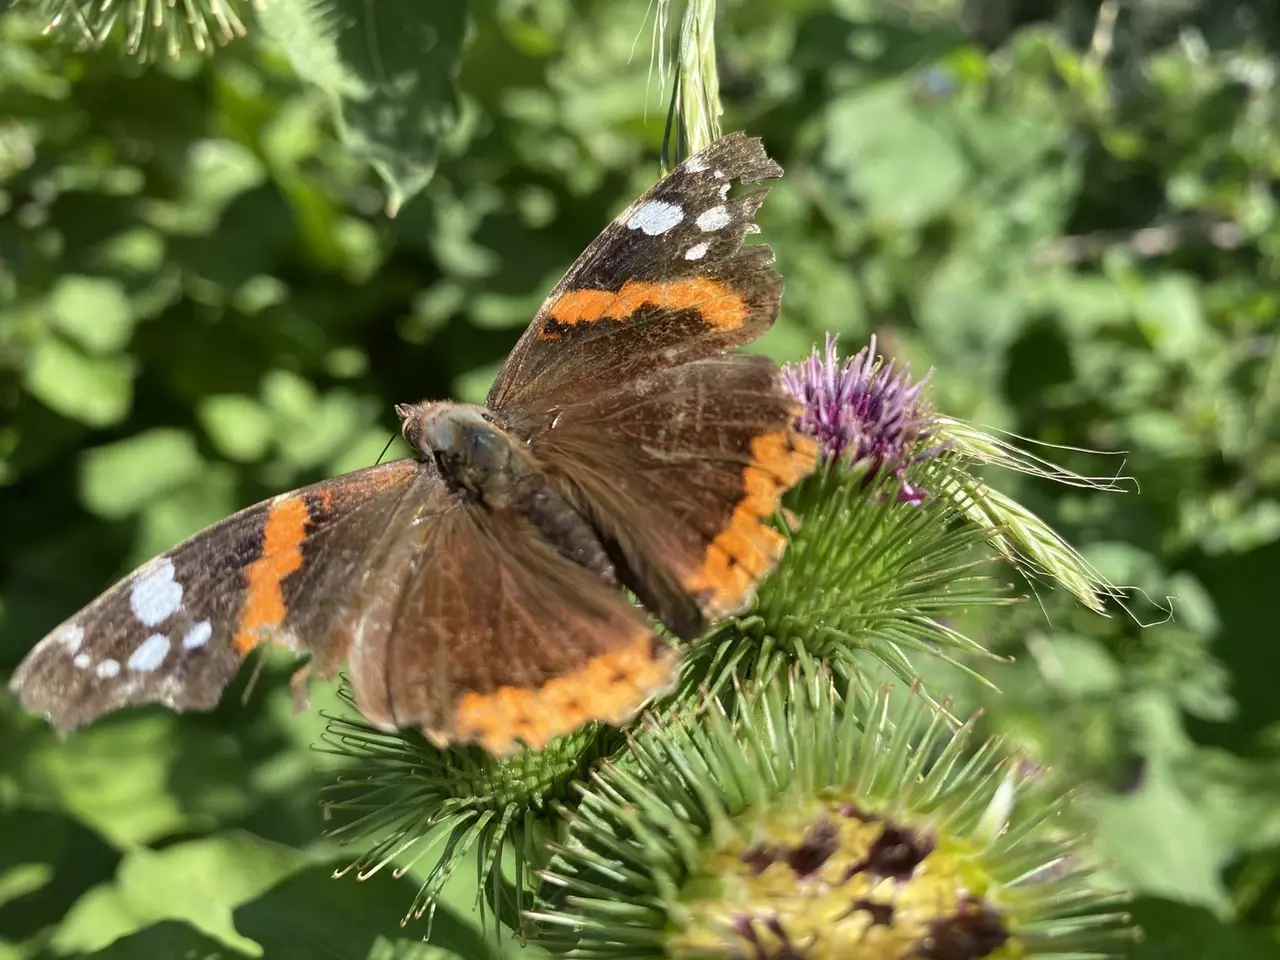 Red Admiral butterfly on a thistle